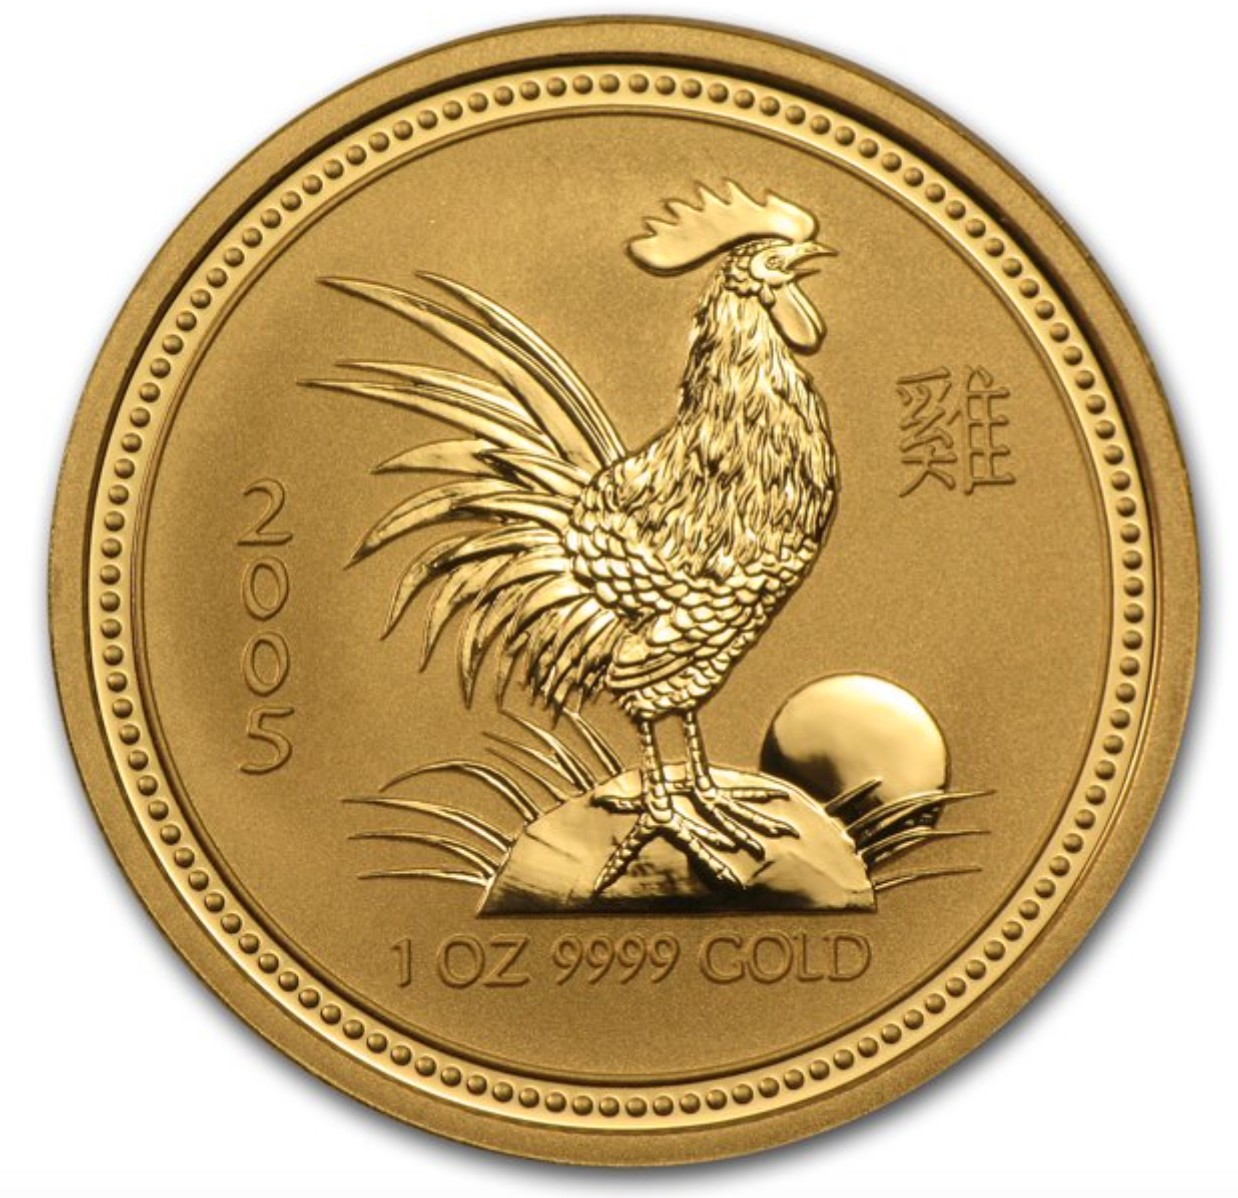 CNY Gold Coin - Rooster